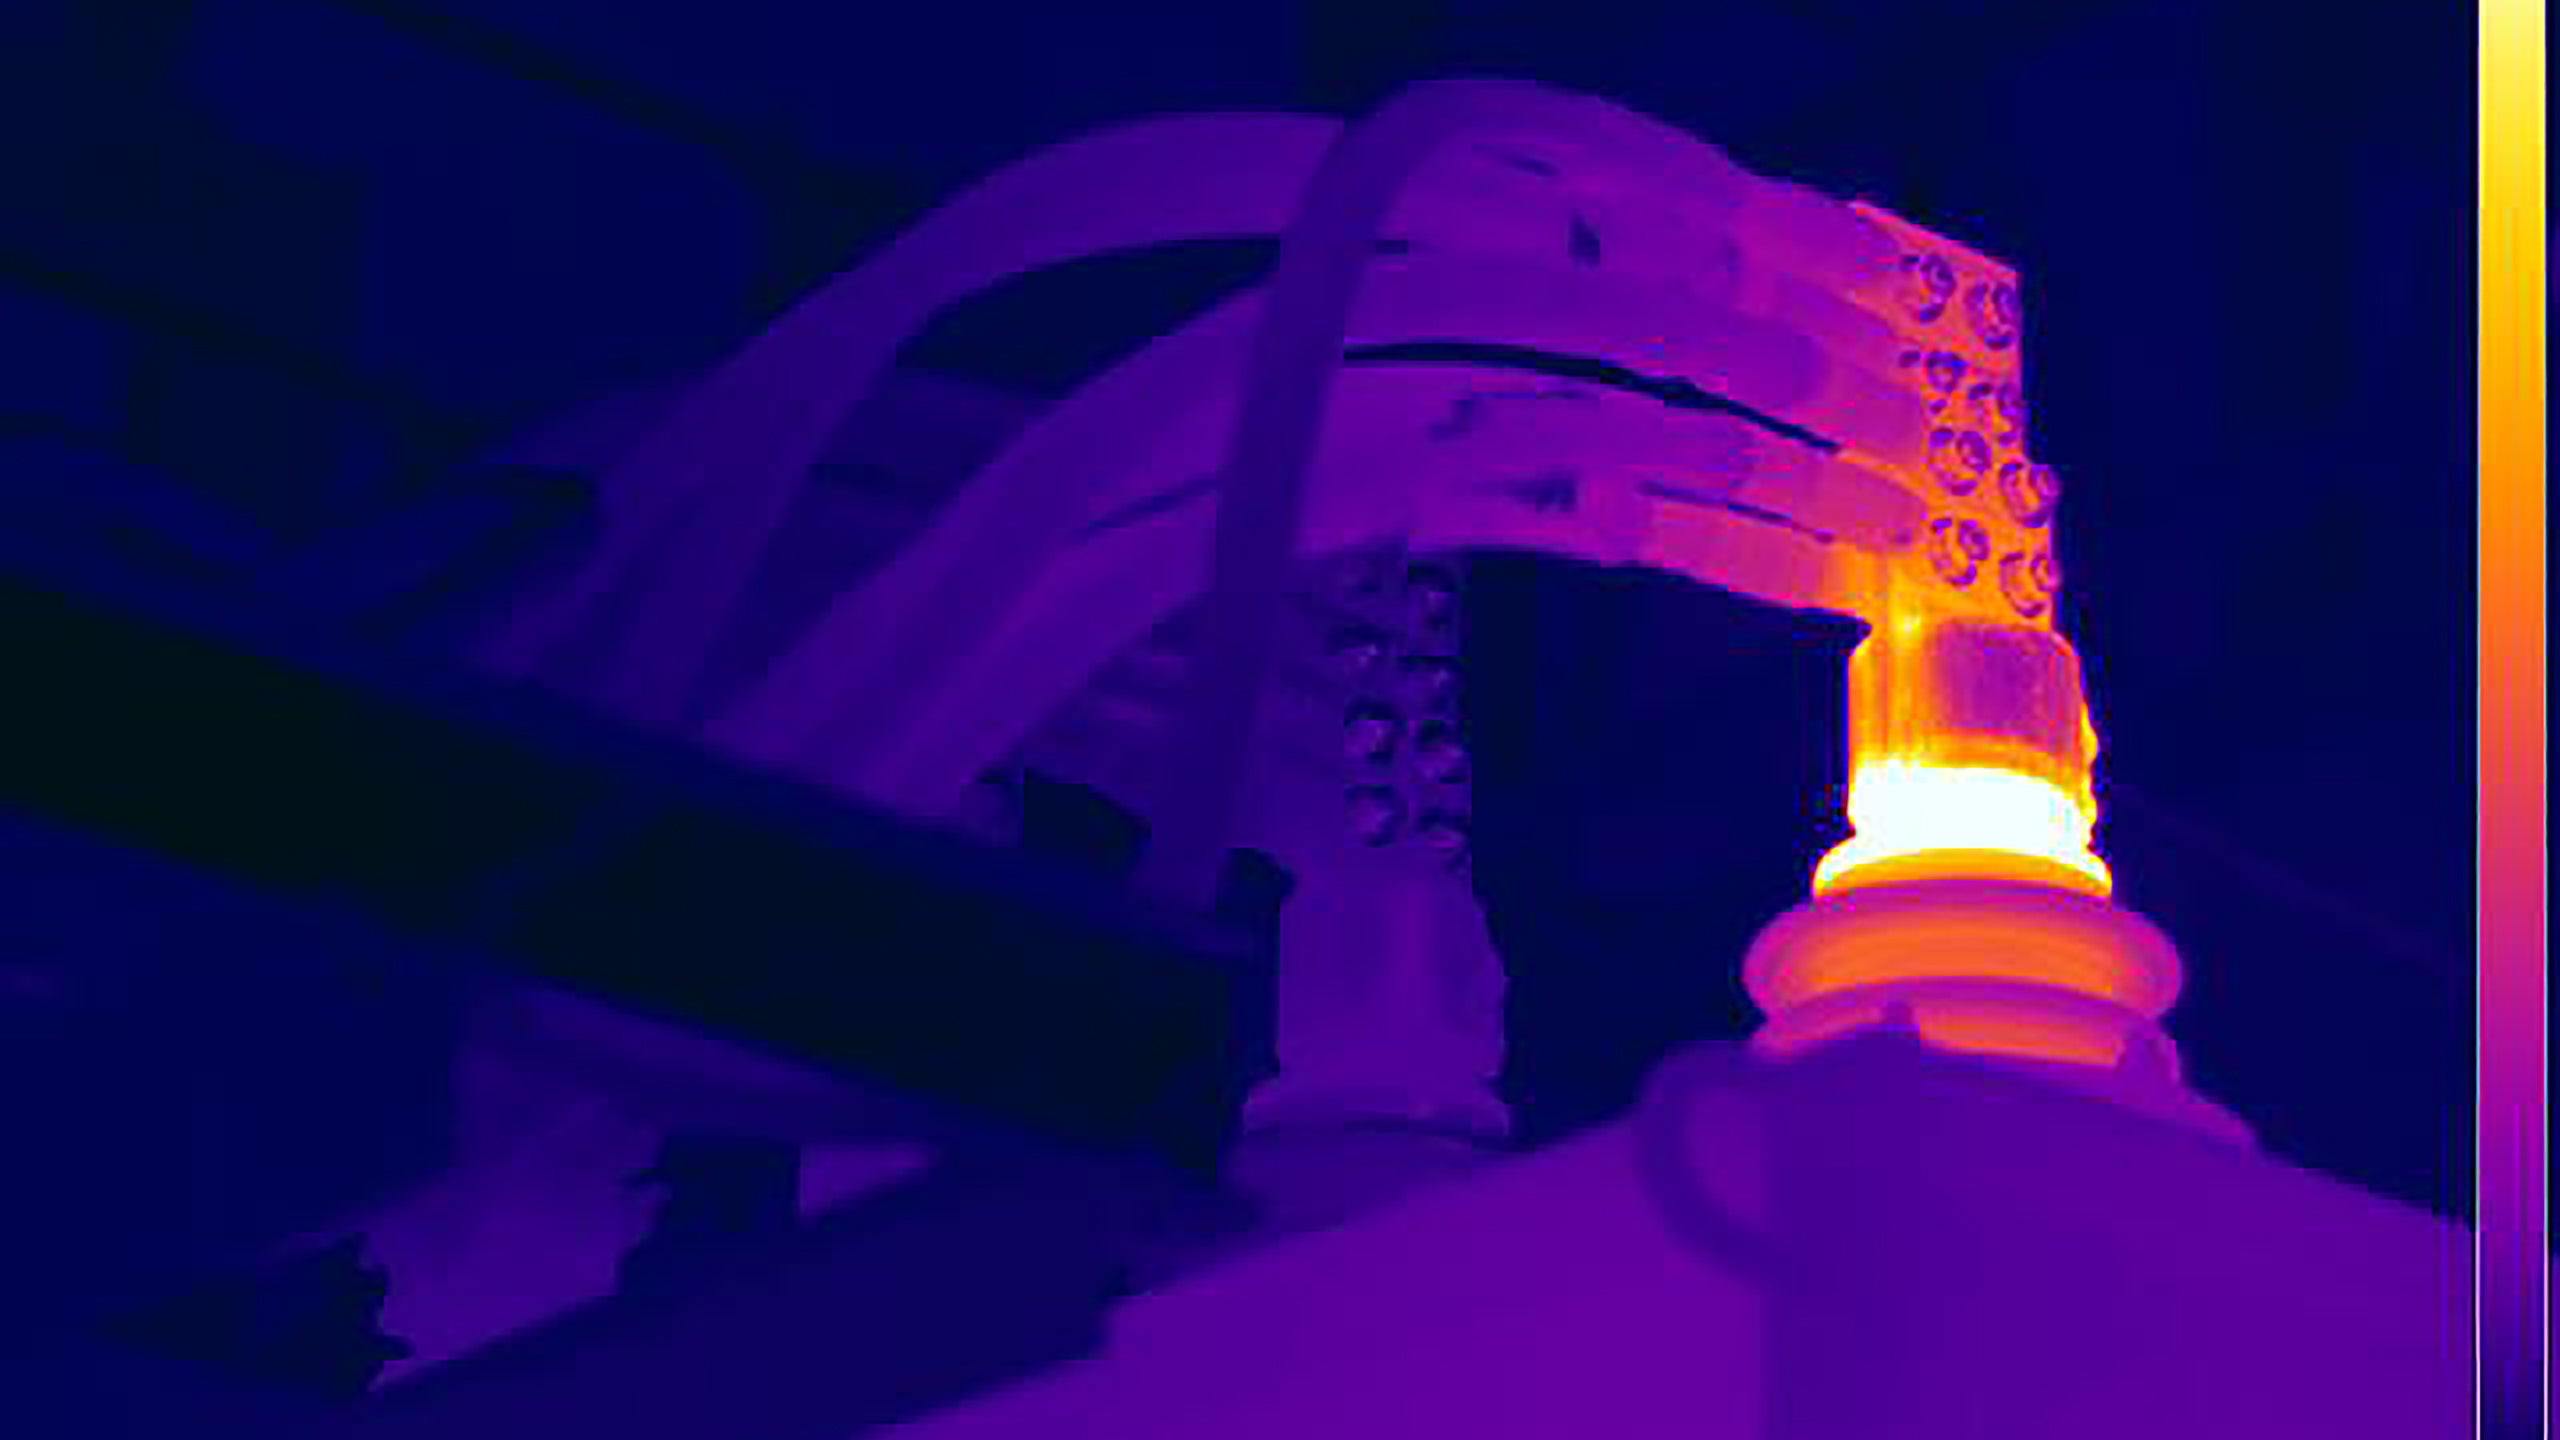 Transformer bushing - HSB thermography example